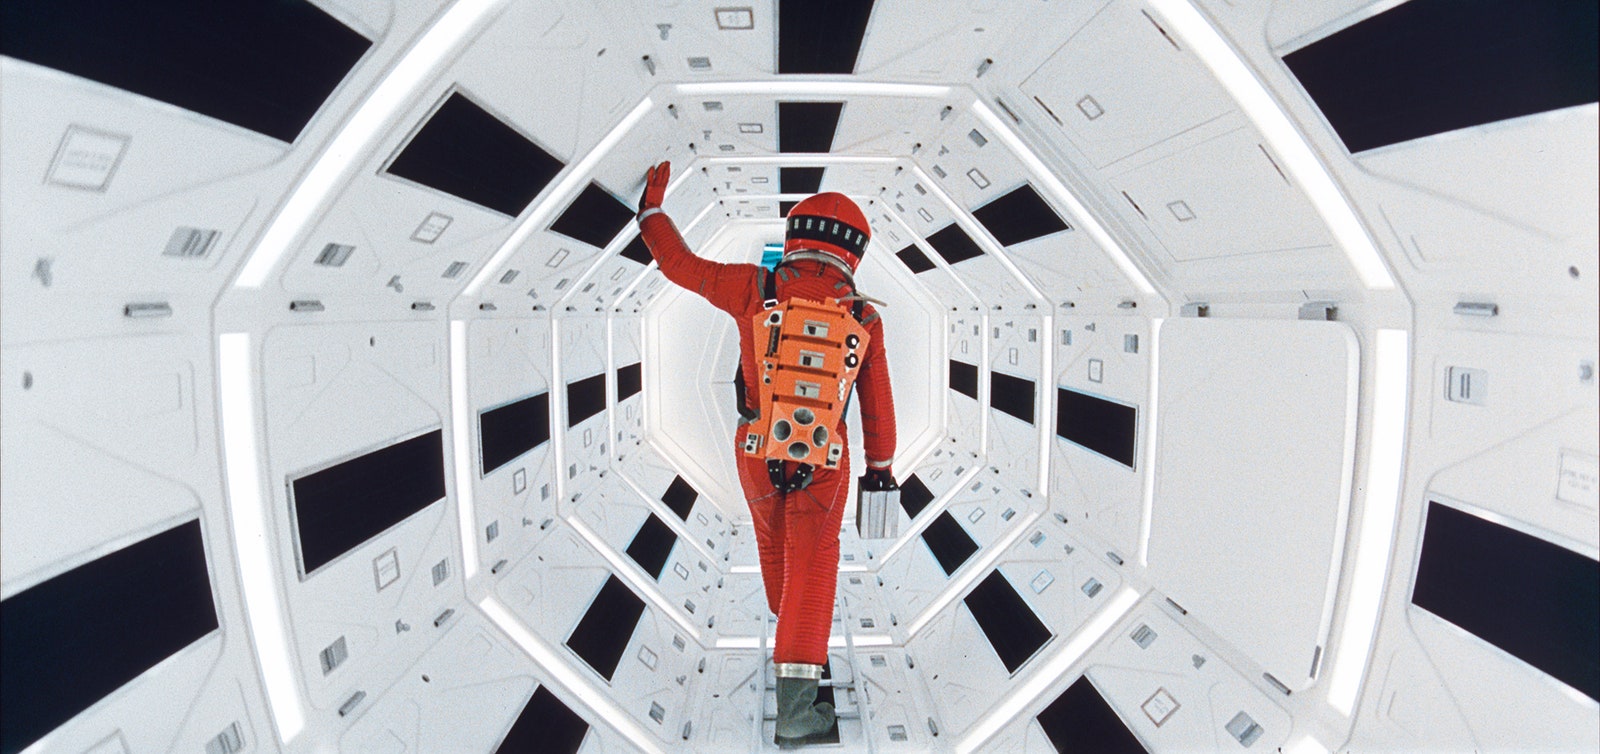 “2001 A Space Odyssey” directed by Stanley Kubrick . Still image. © Warner Bros. Entertainment Inc.